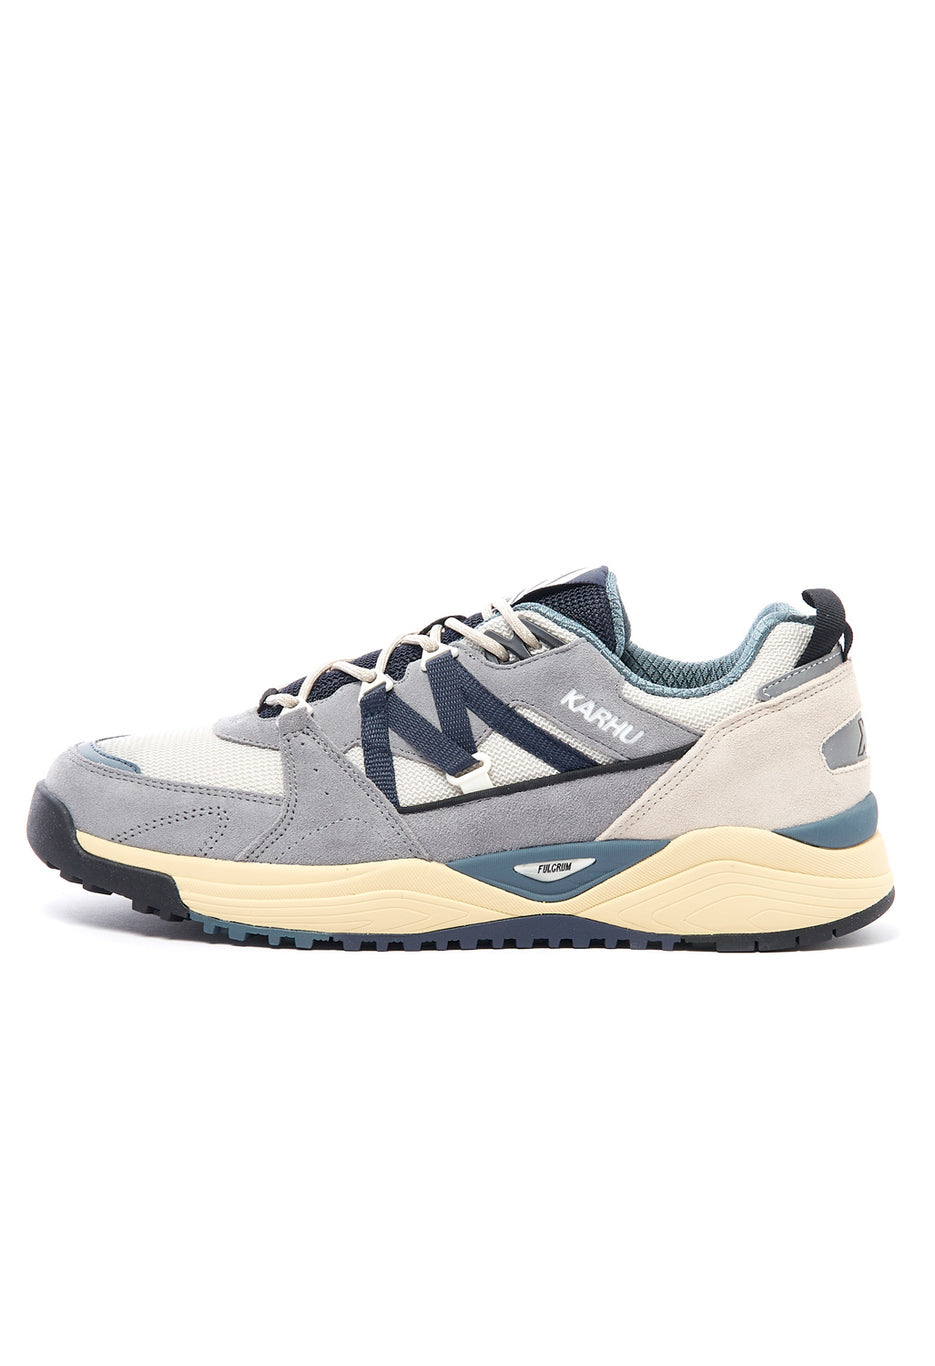 Karhu Fusion XC Trainers - Ultimate Gray / India Ink